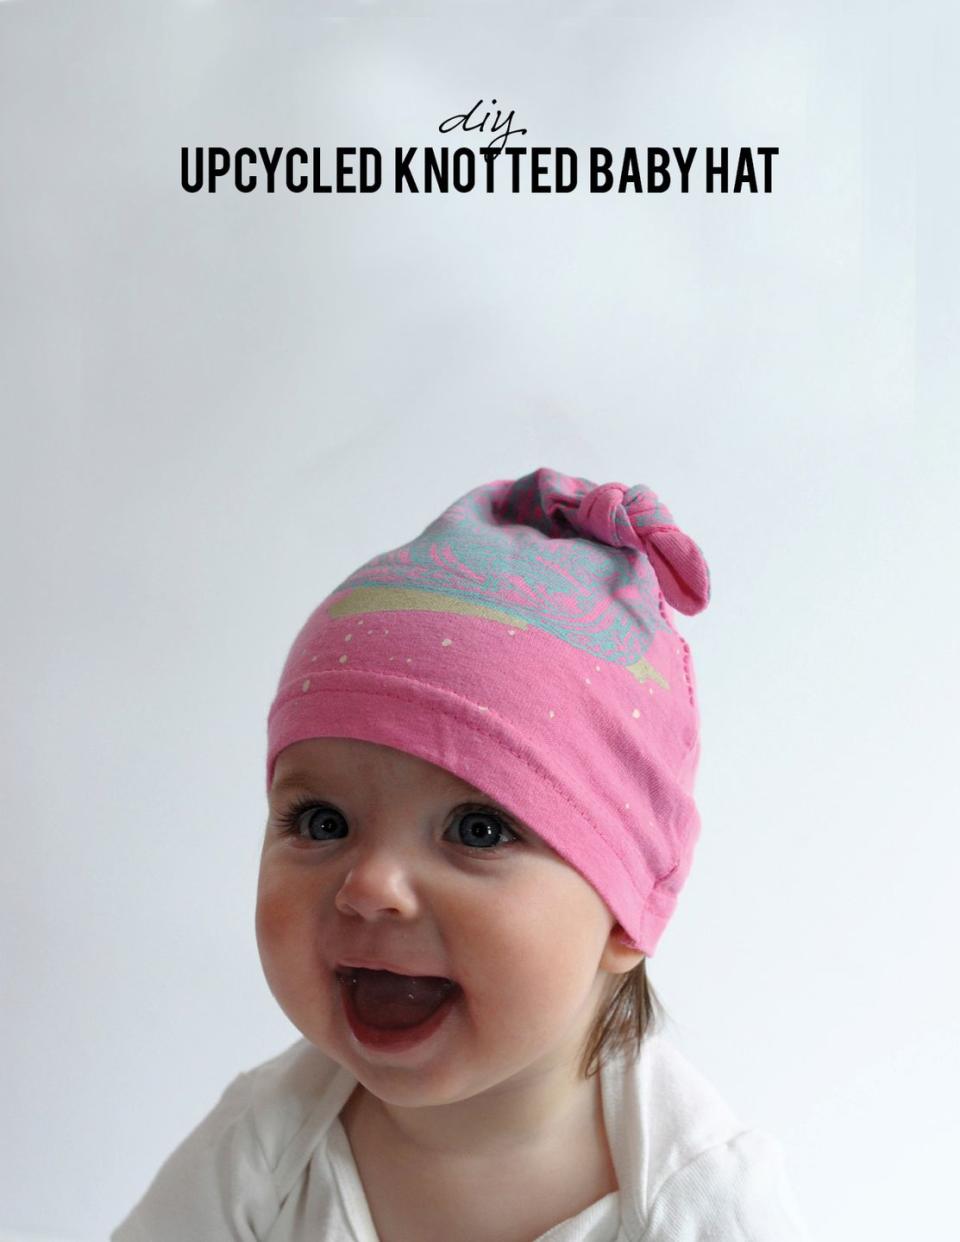 AFTER: Baby Hat